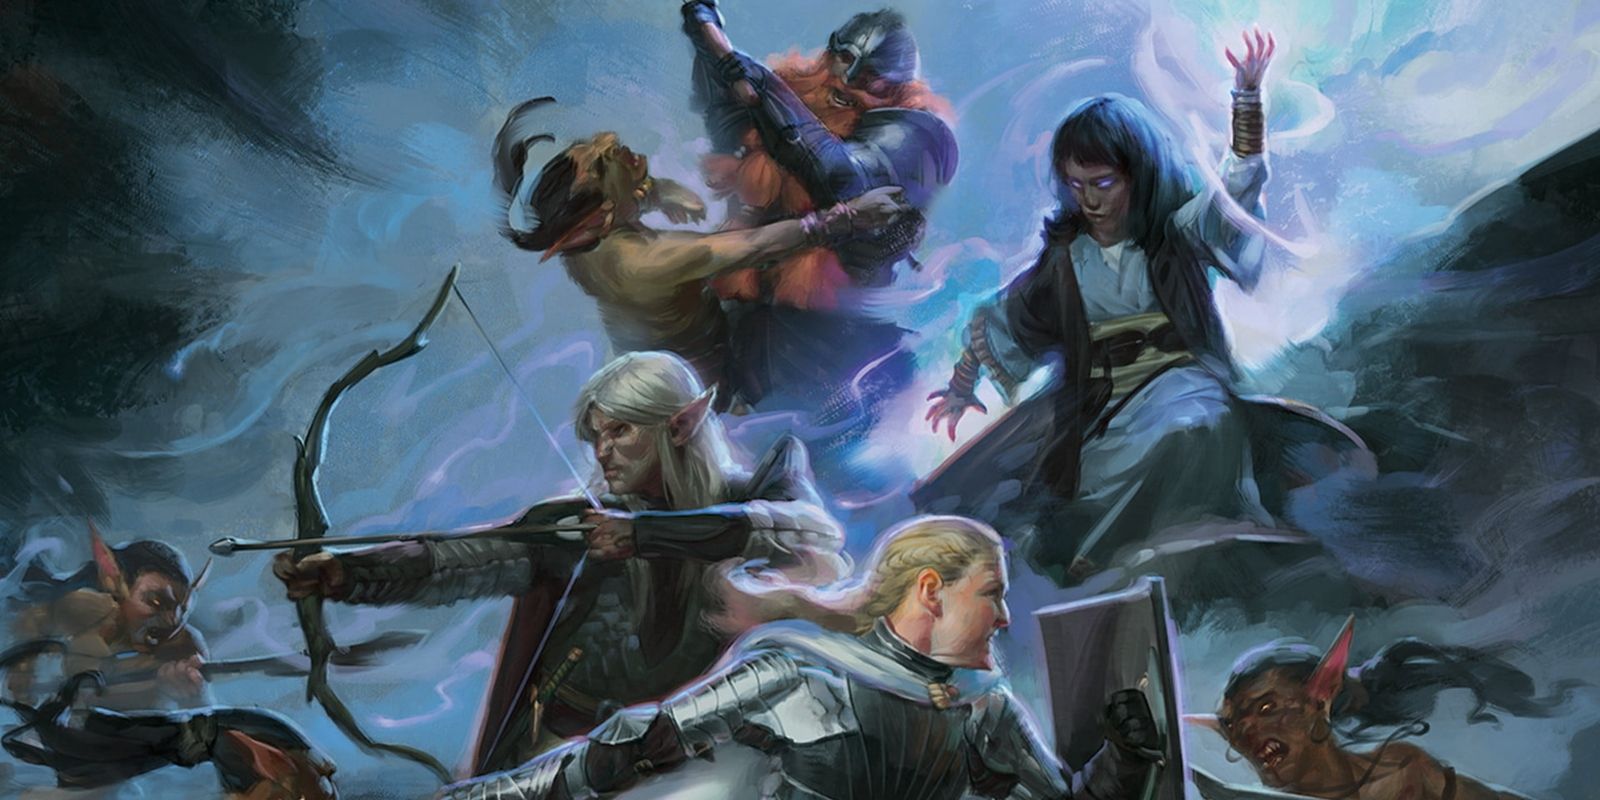 Artwork from the DnD 5e player's handbook depicting a party battling creatures